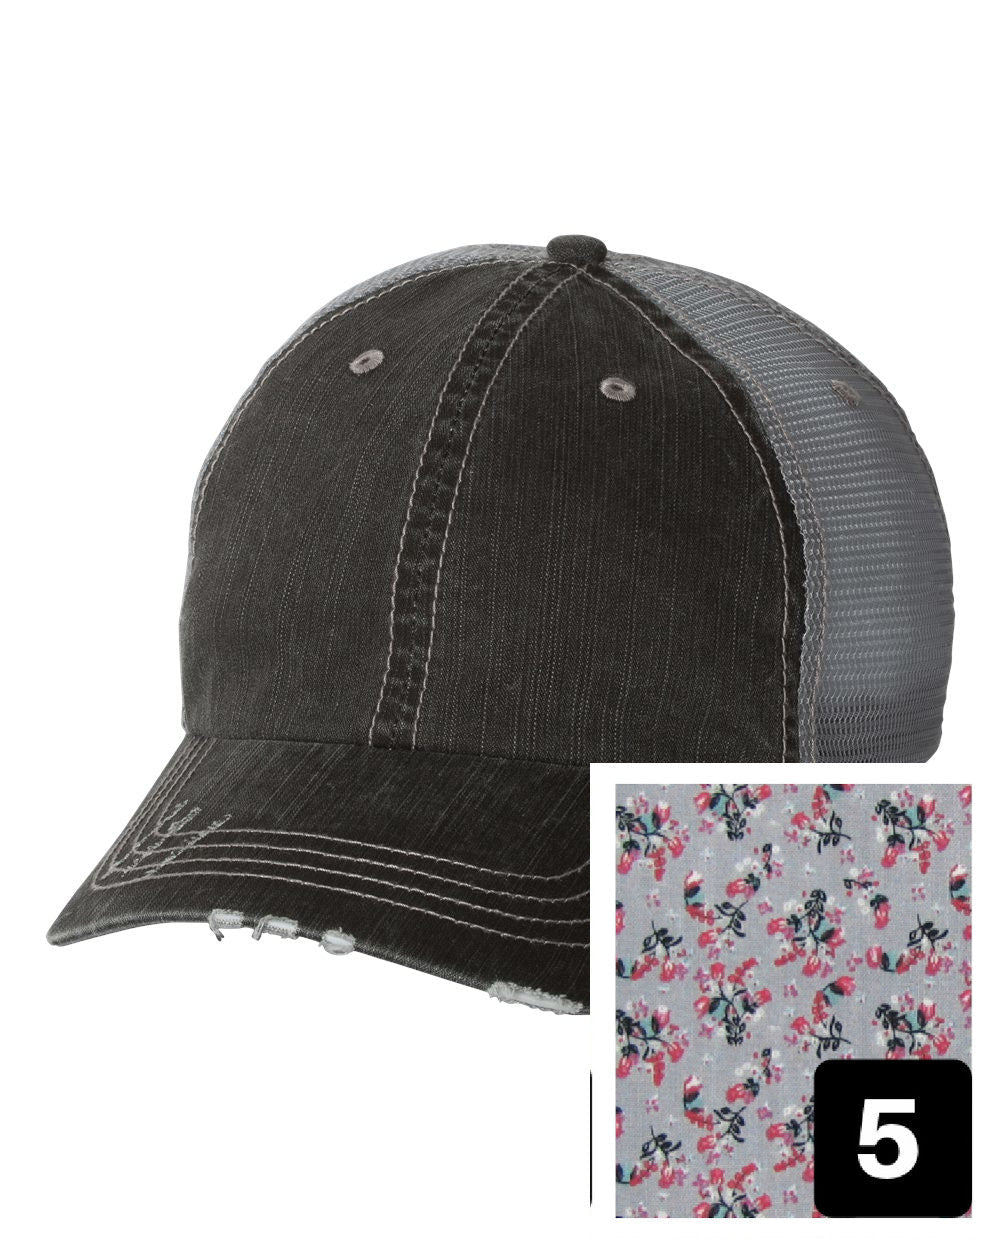 gray distressed trucker hat with purple and pink floral fabric state of Colorado